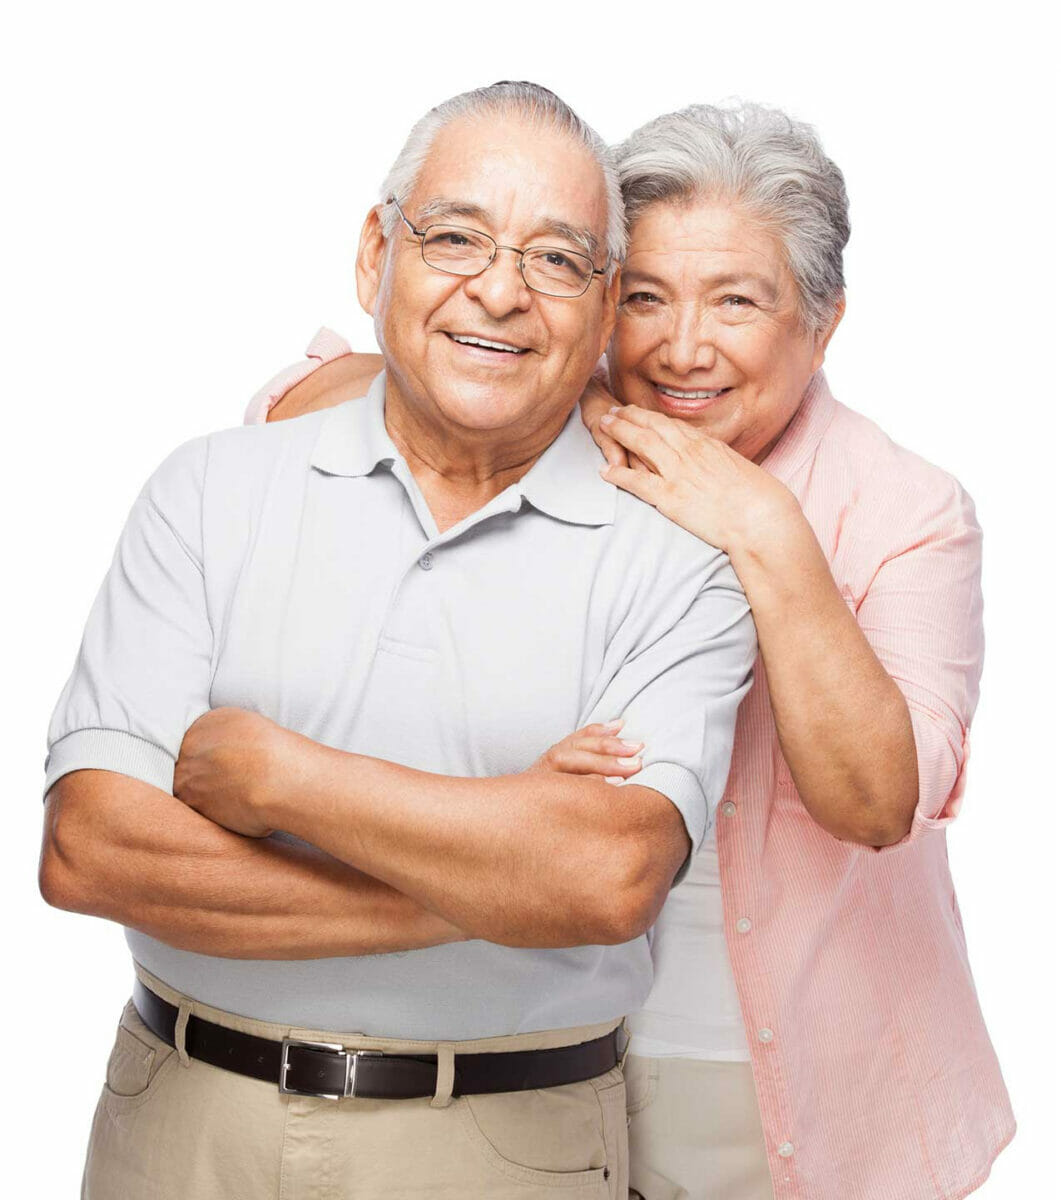 Mature couple smiling at camera. Man standing in front with arms crossed, woman behind him with with head and hands resting on his shoulder.